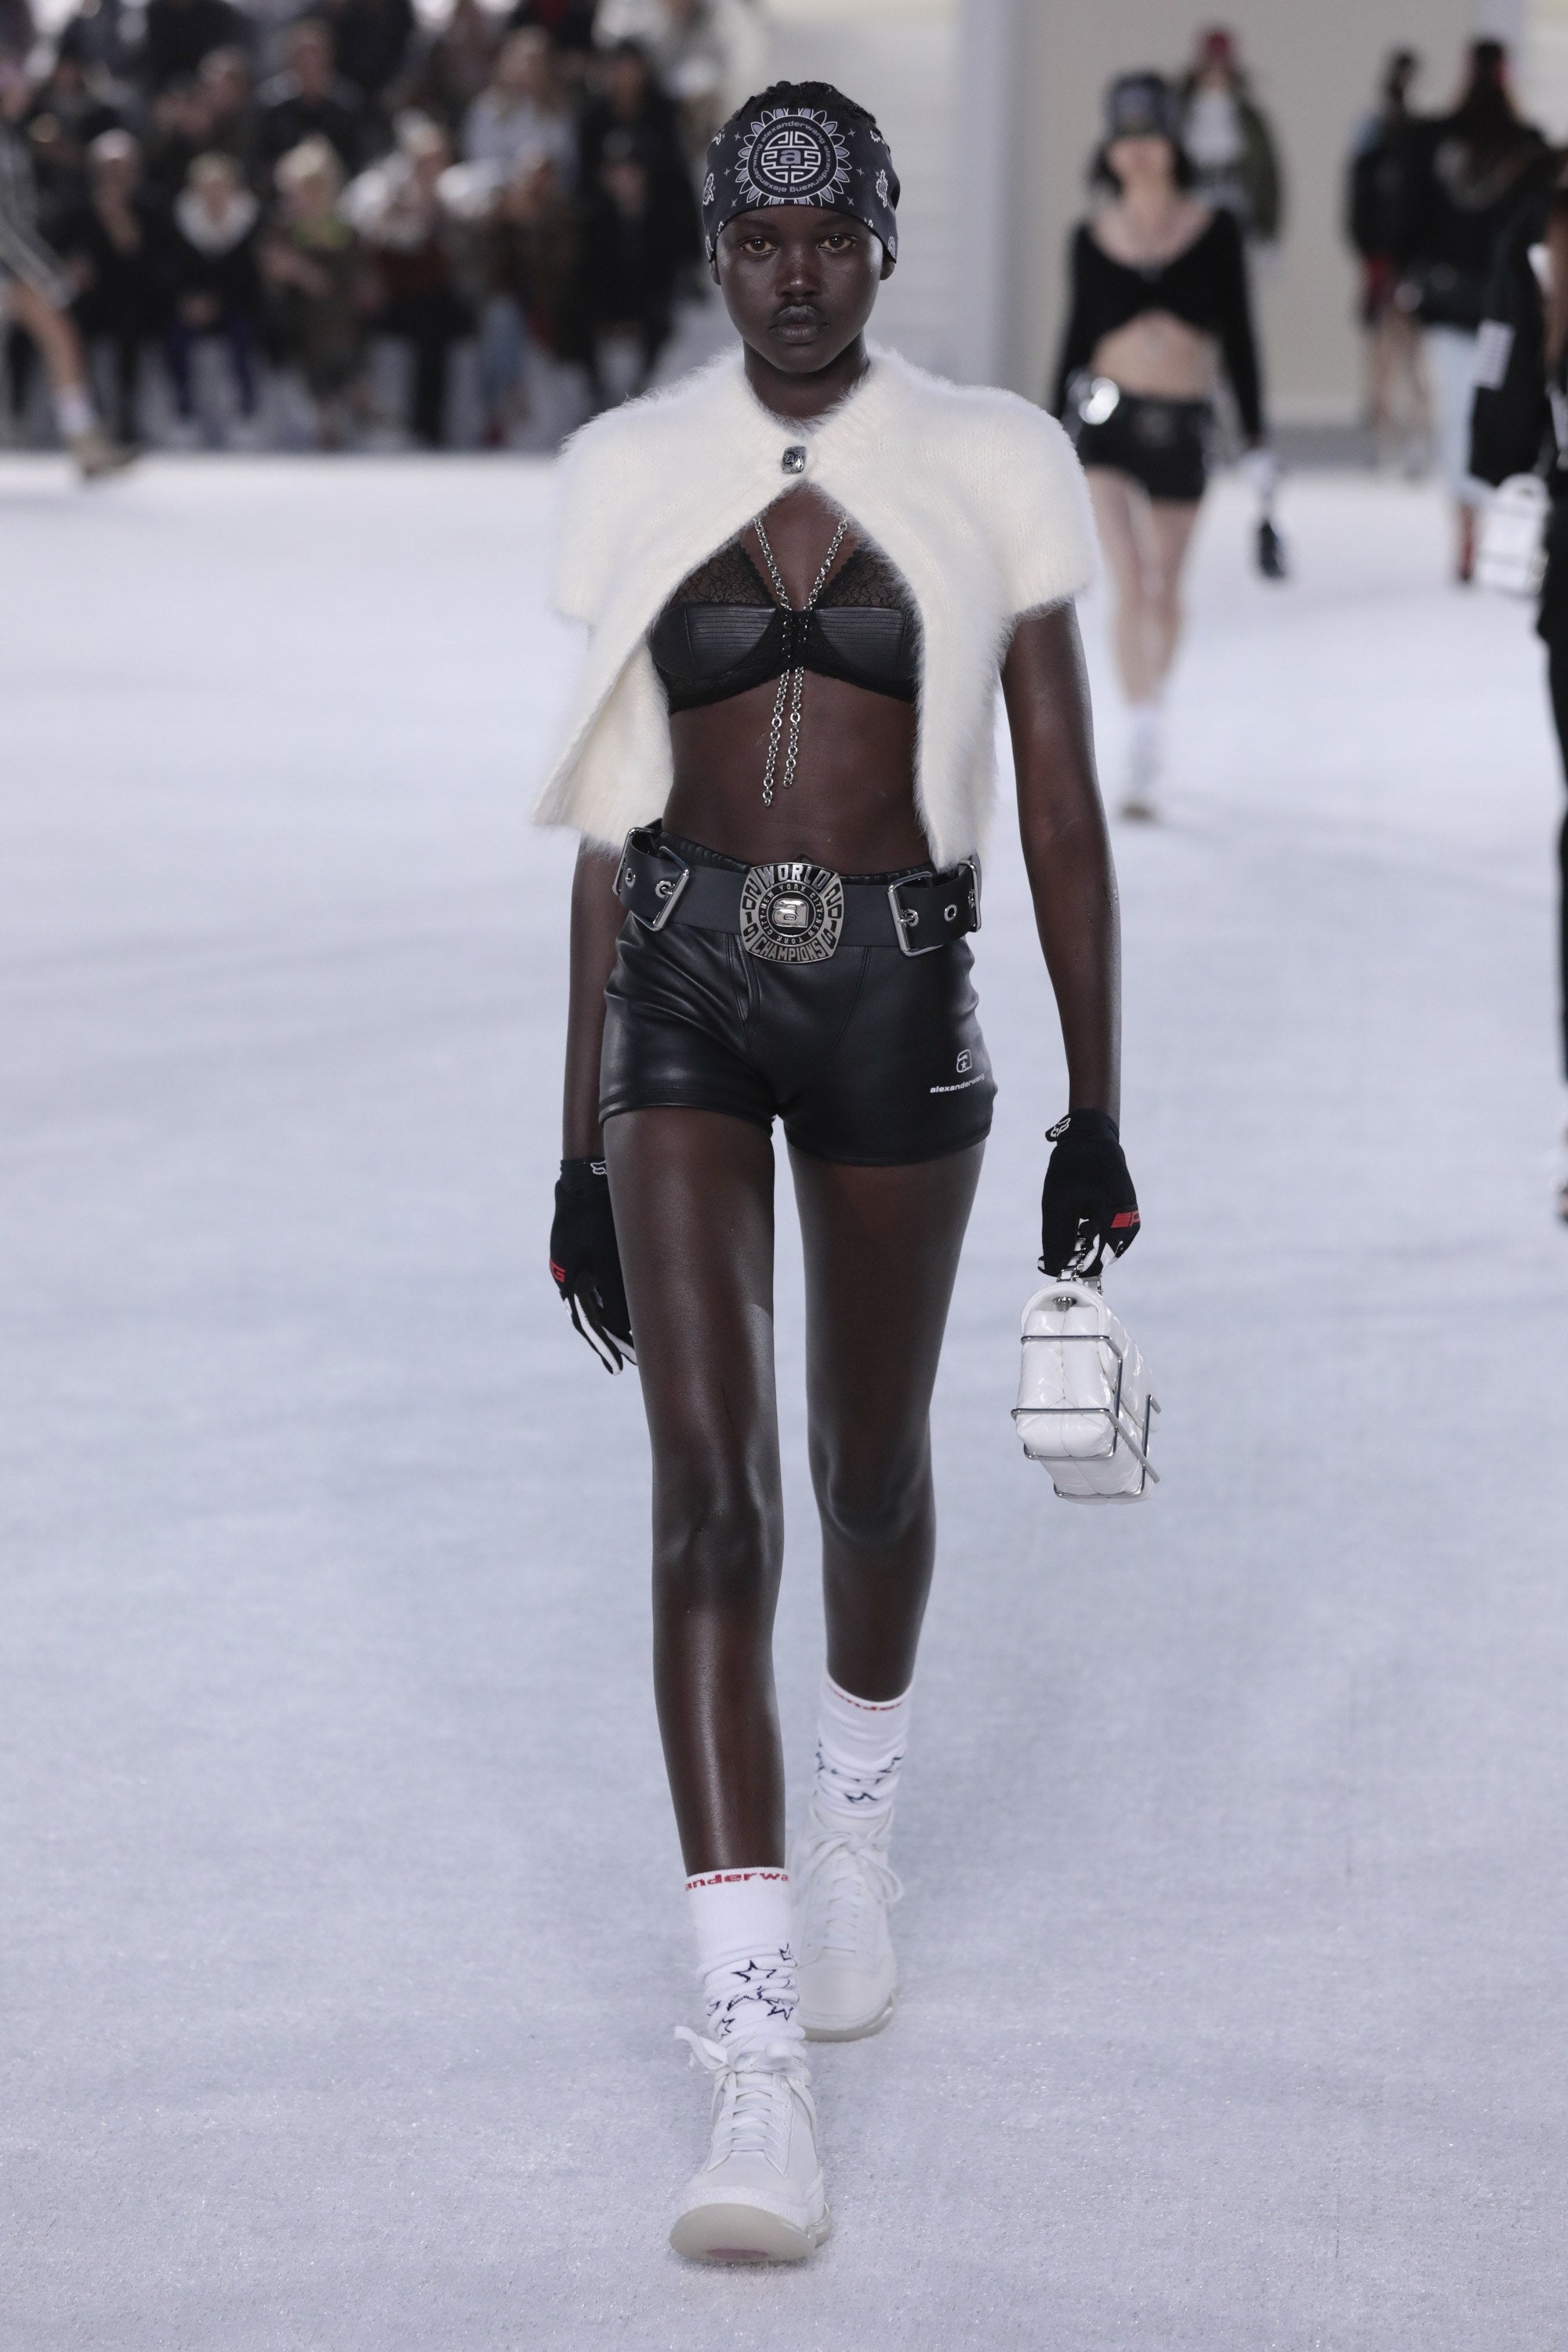 Fashion Week Came Early! Alexander Wang Wows NYC With New Collection Debut
